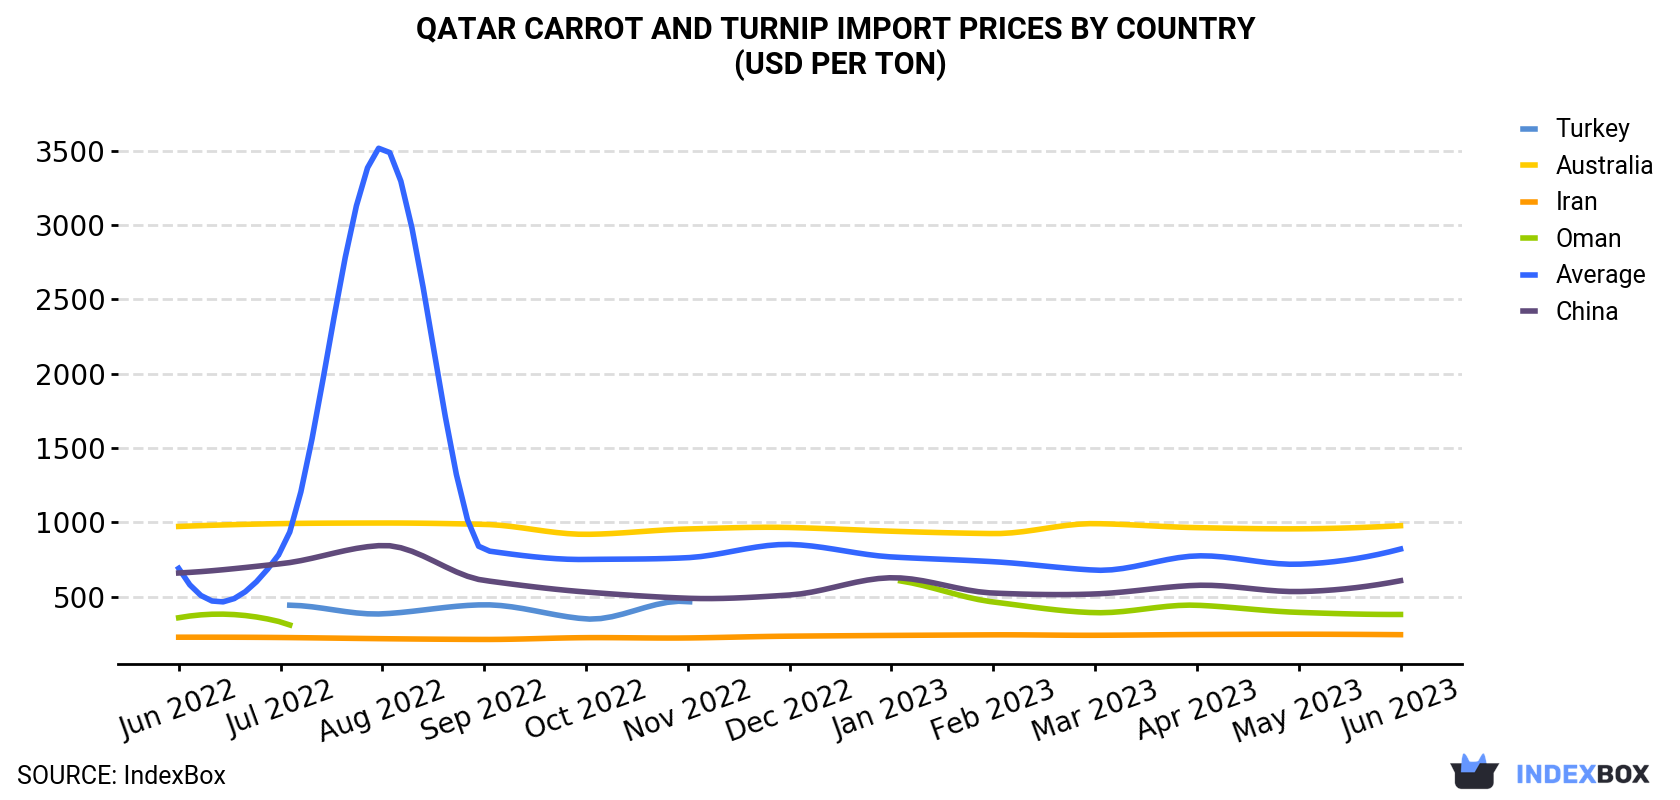 Qatar Carrot And Turnip Import Prices By Country (USD Per Ton)